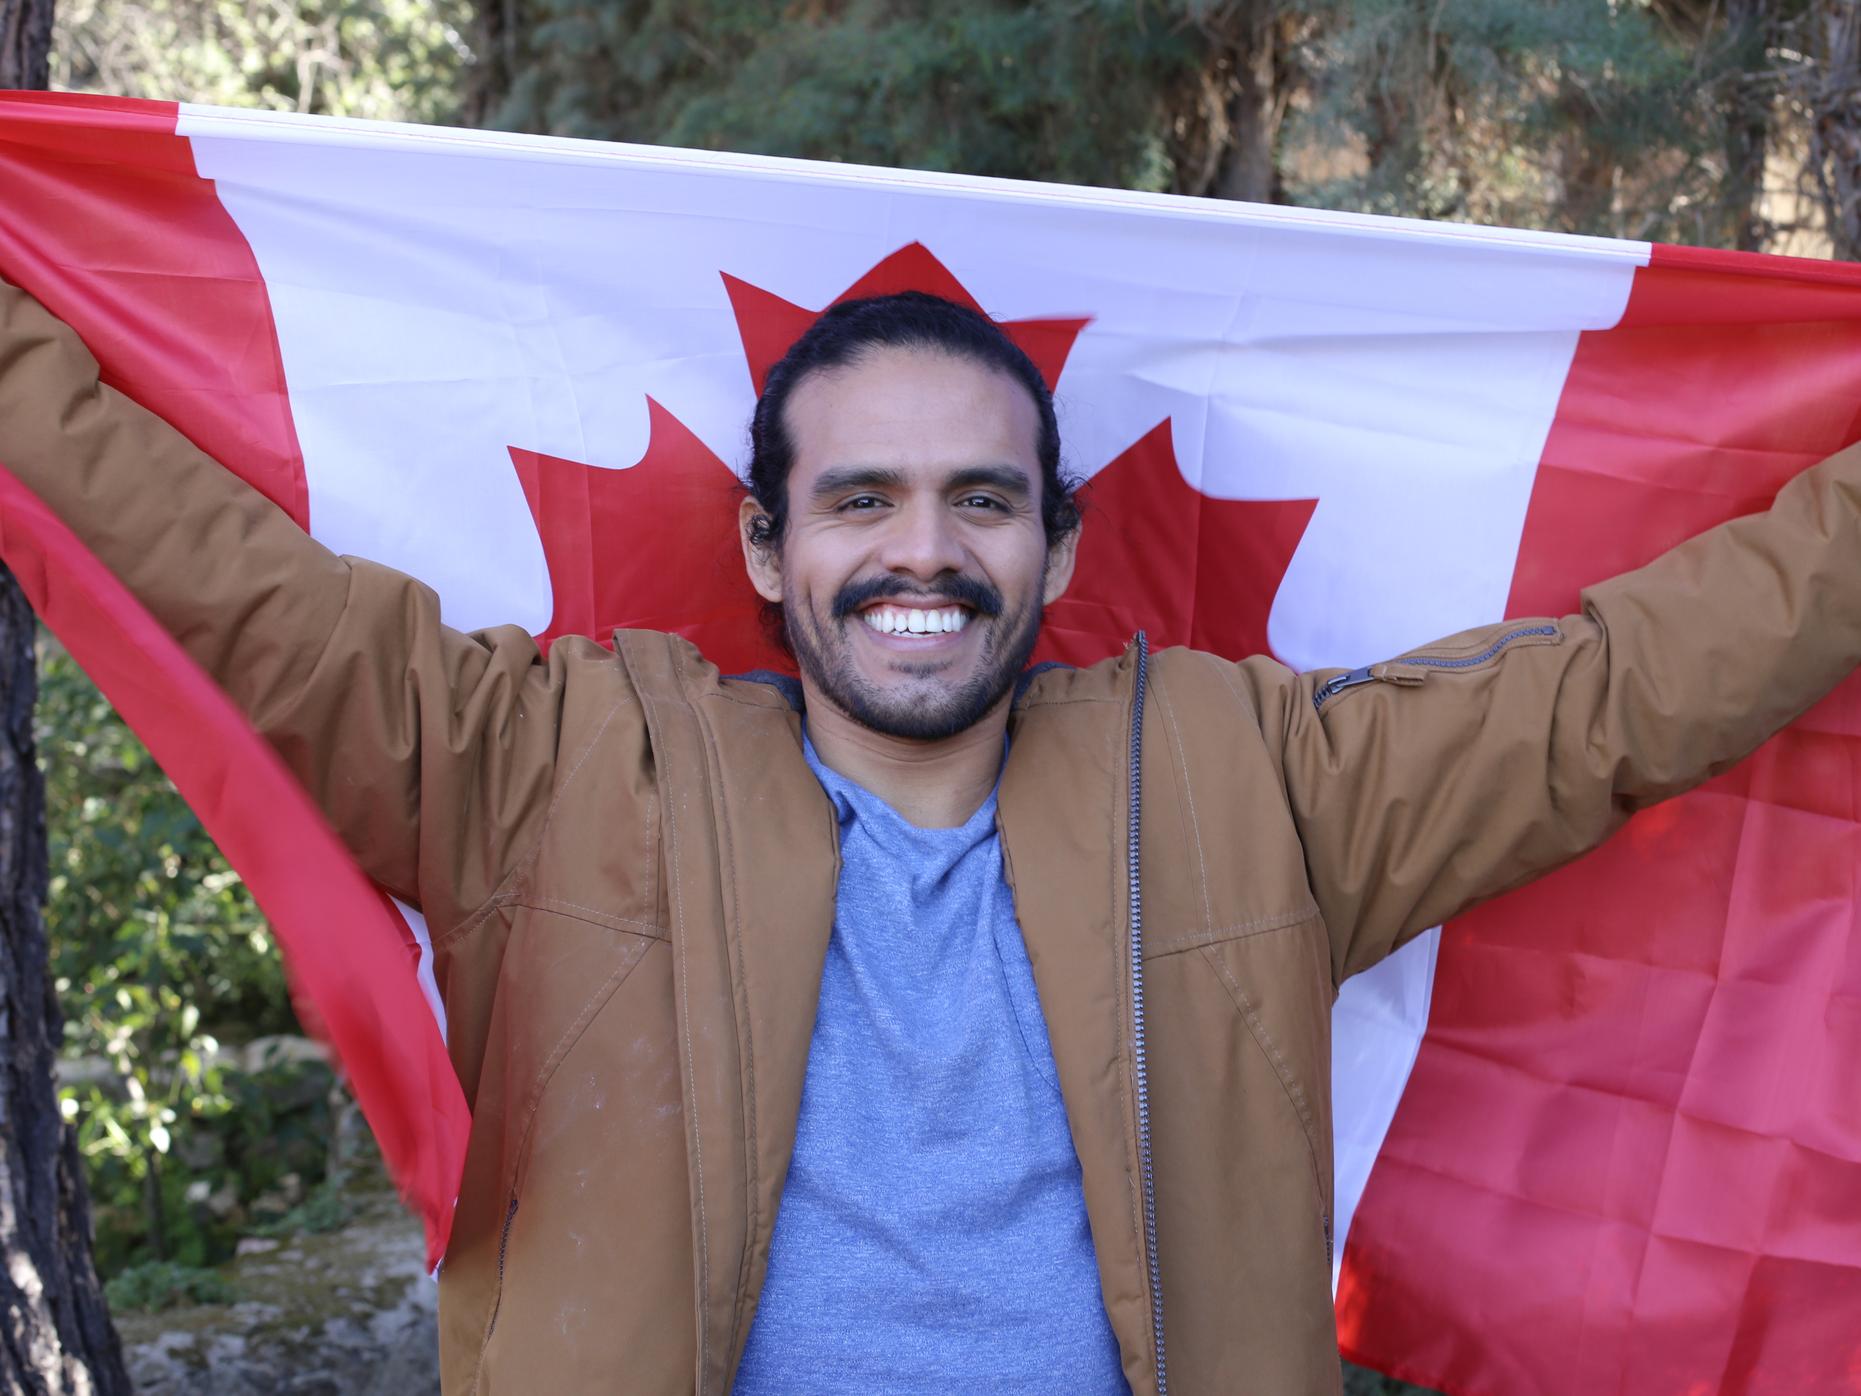 A new Canadian holding a Canadian flag and smiling